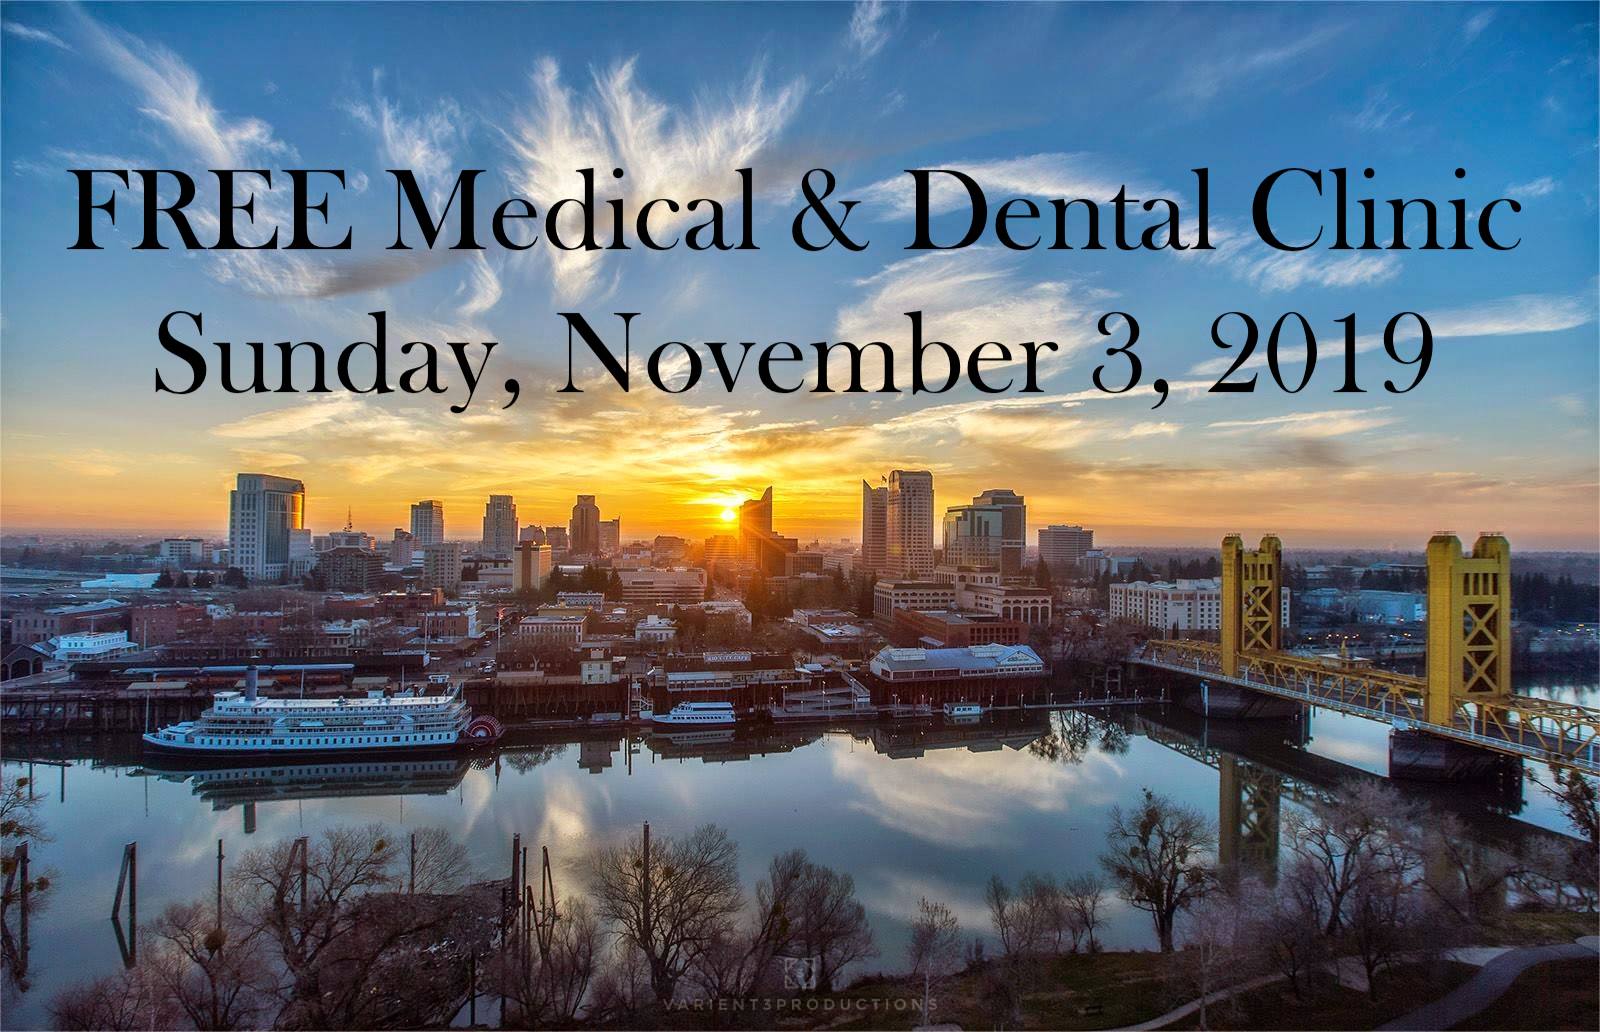 Free Medical & Dental Services Clinic